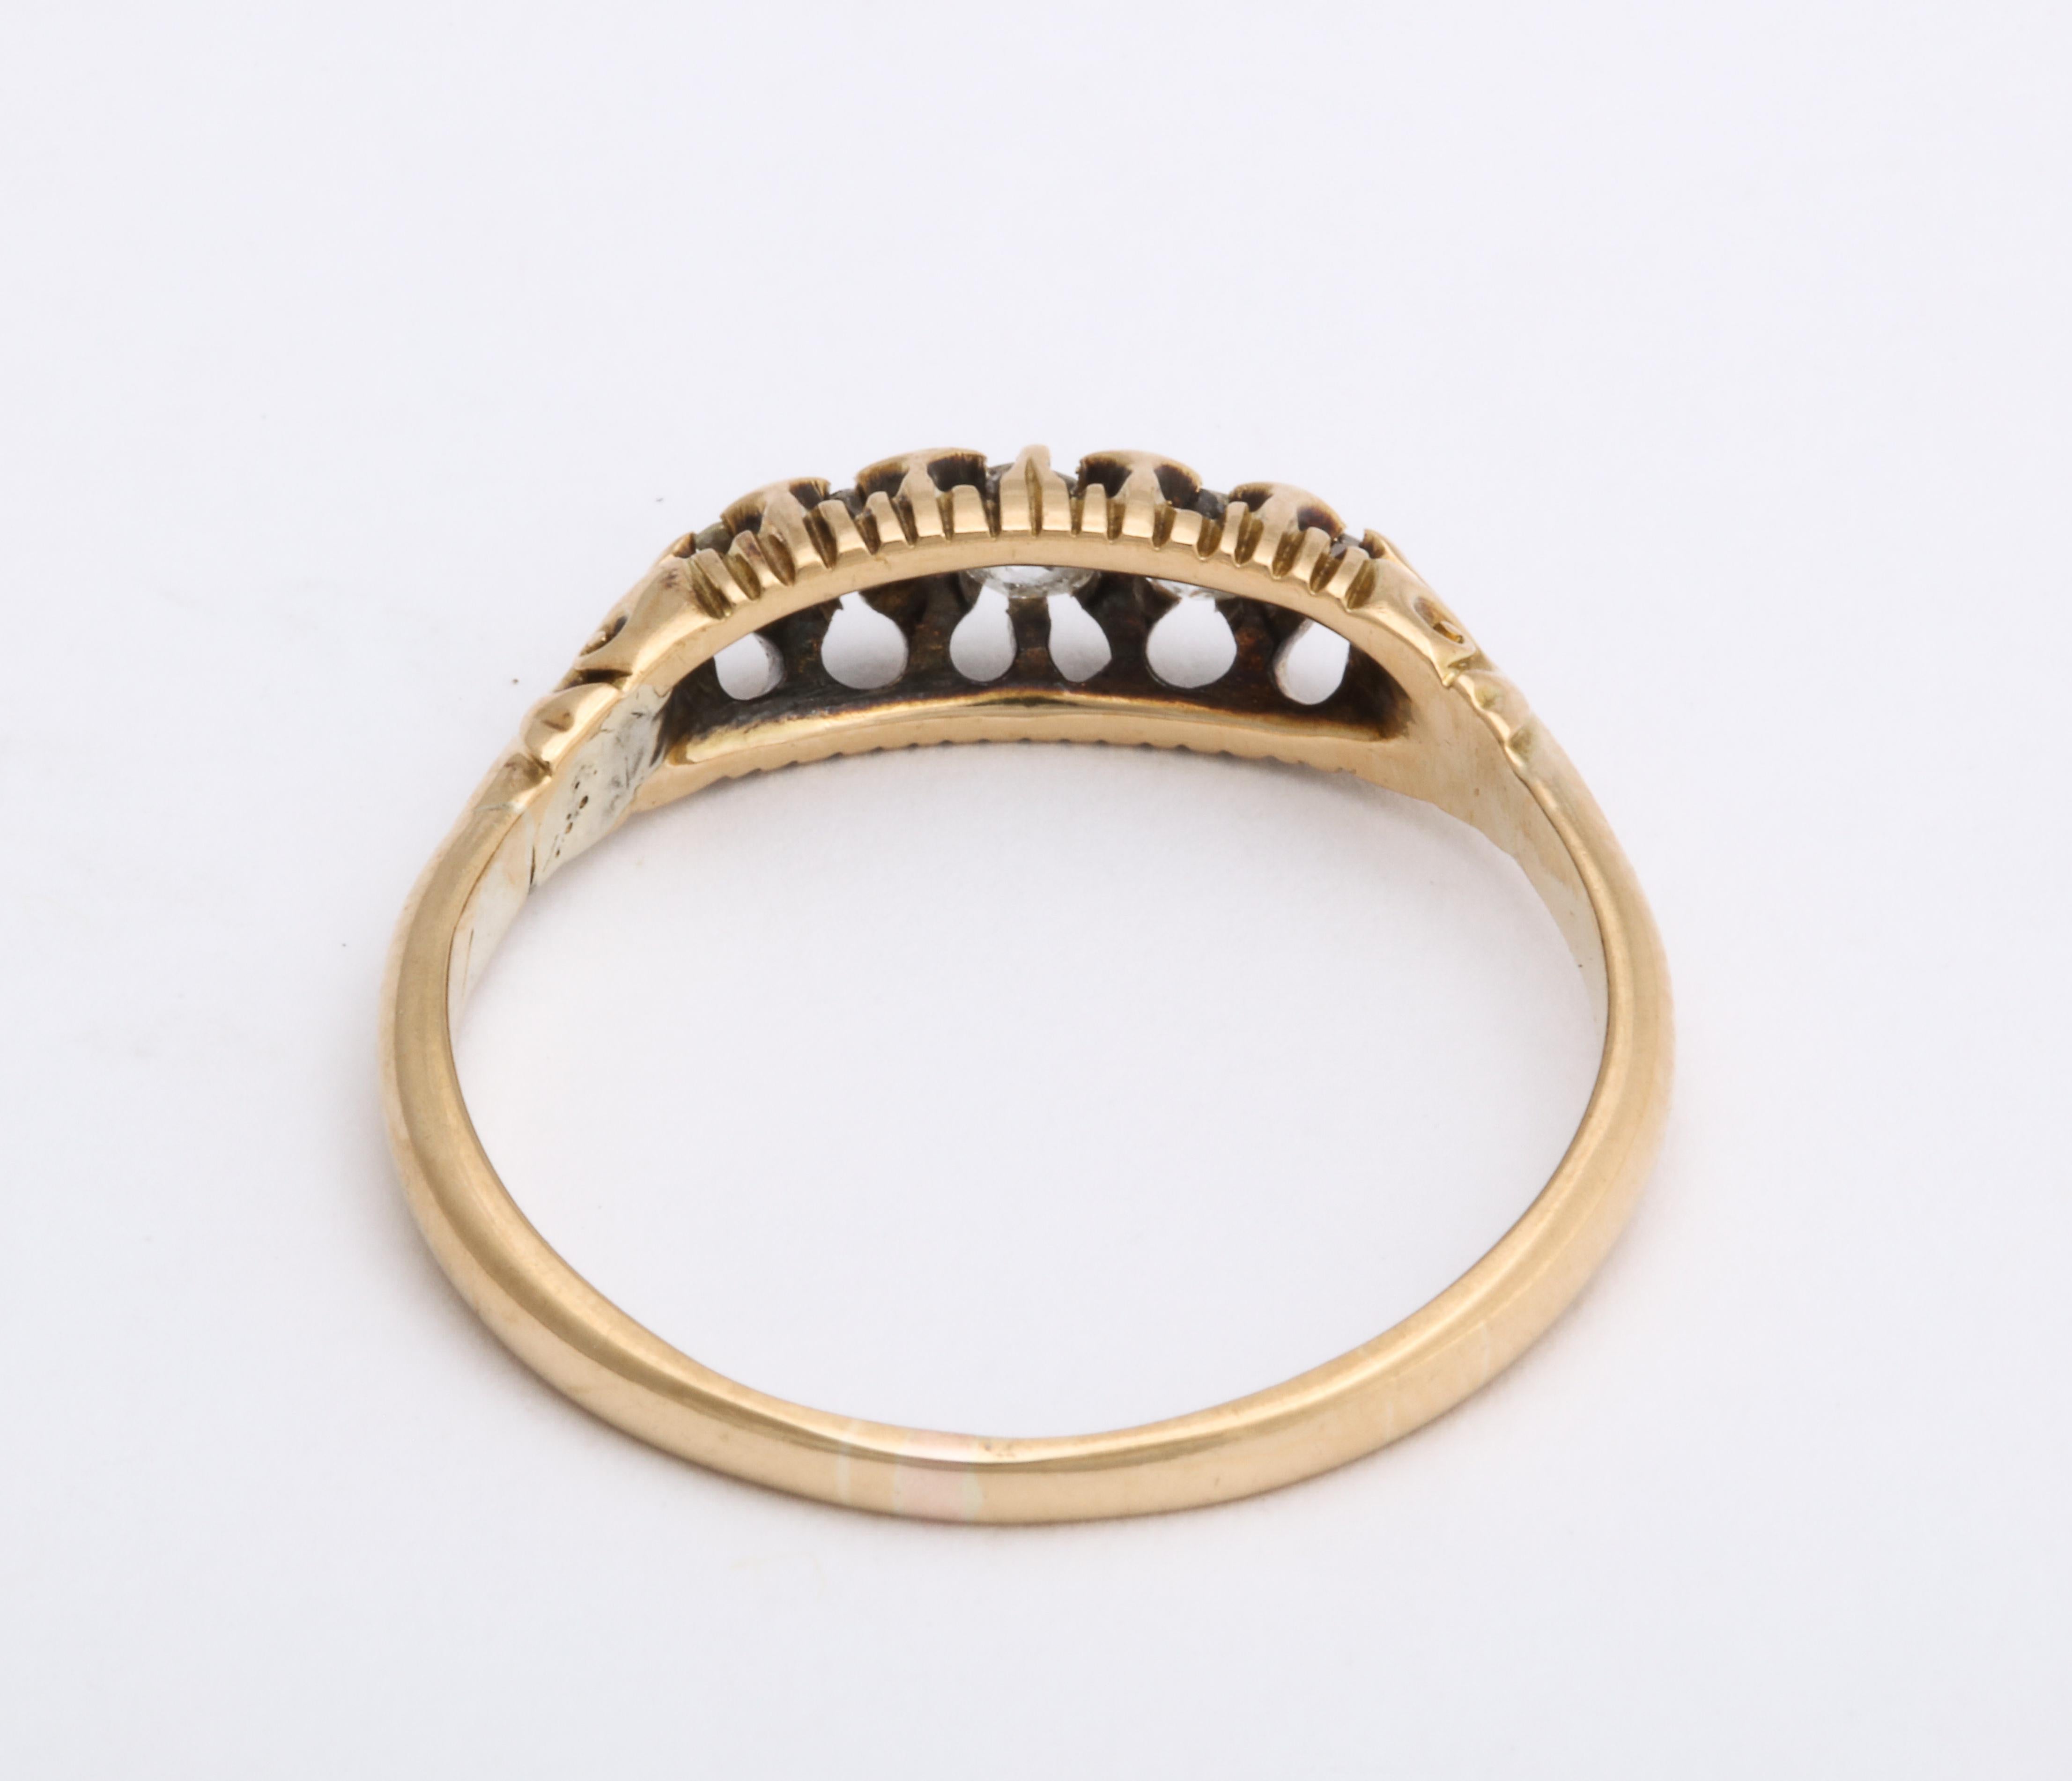 English 18k Gold Diamond Five Stone Ring, Mid-20th Century For Sale 1